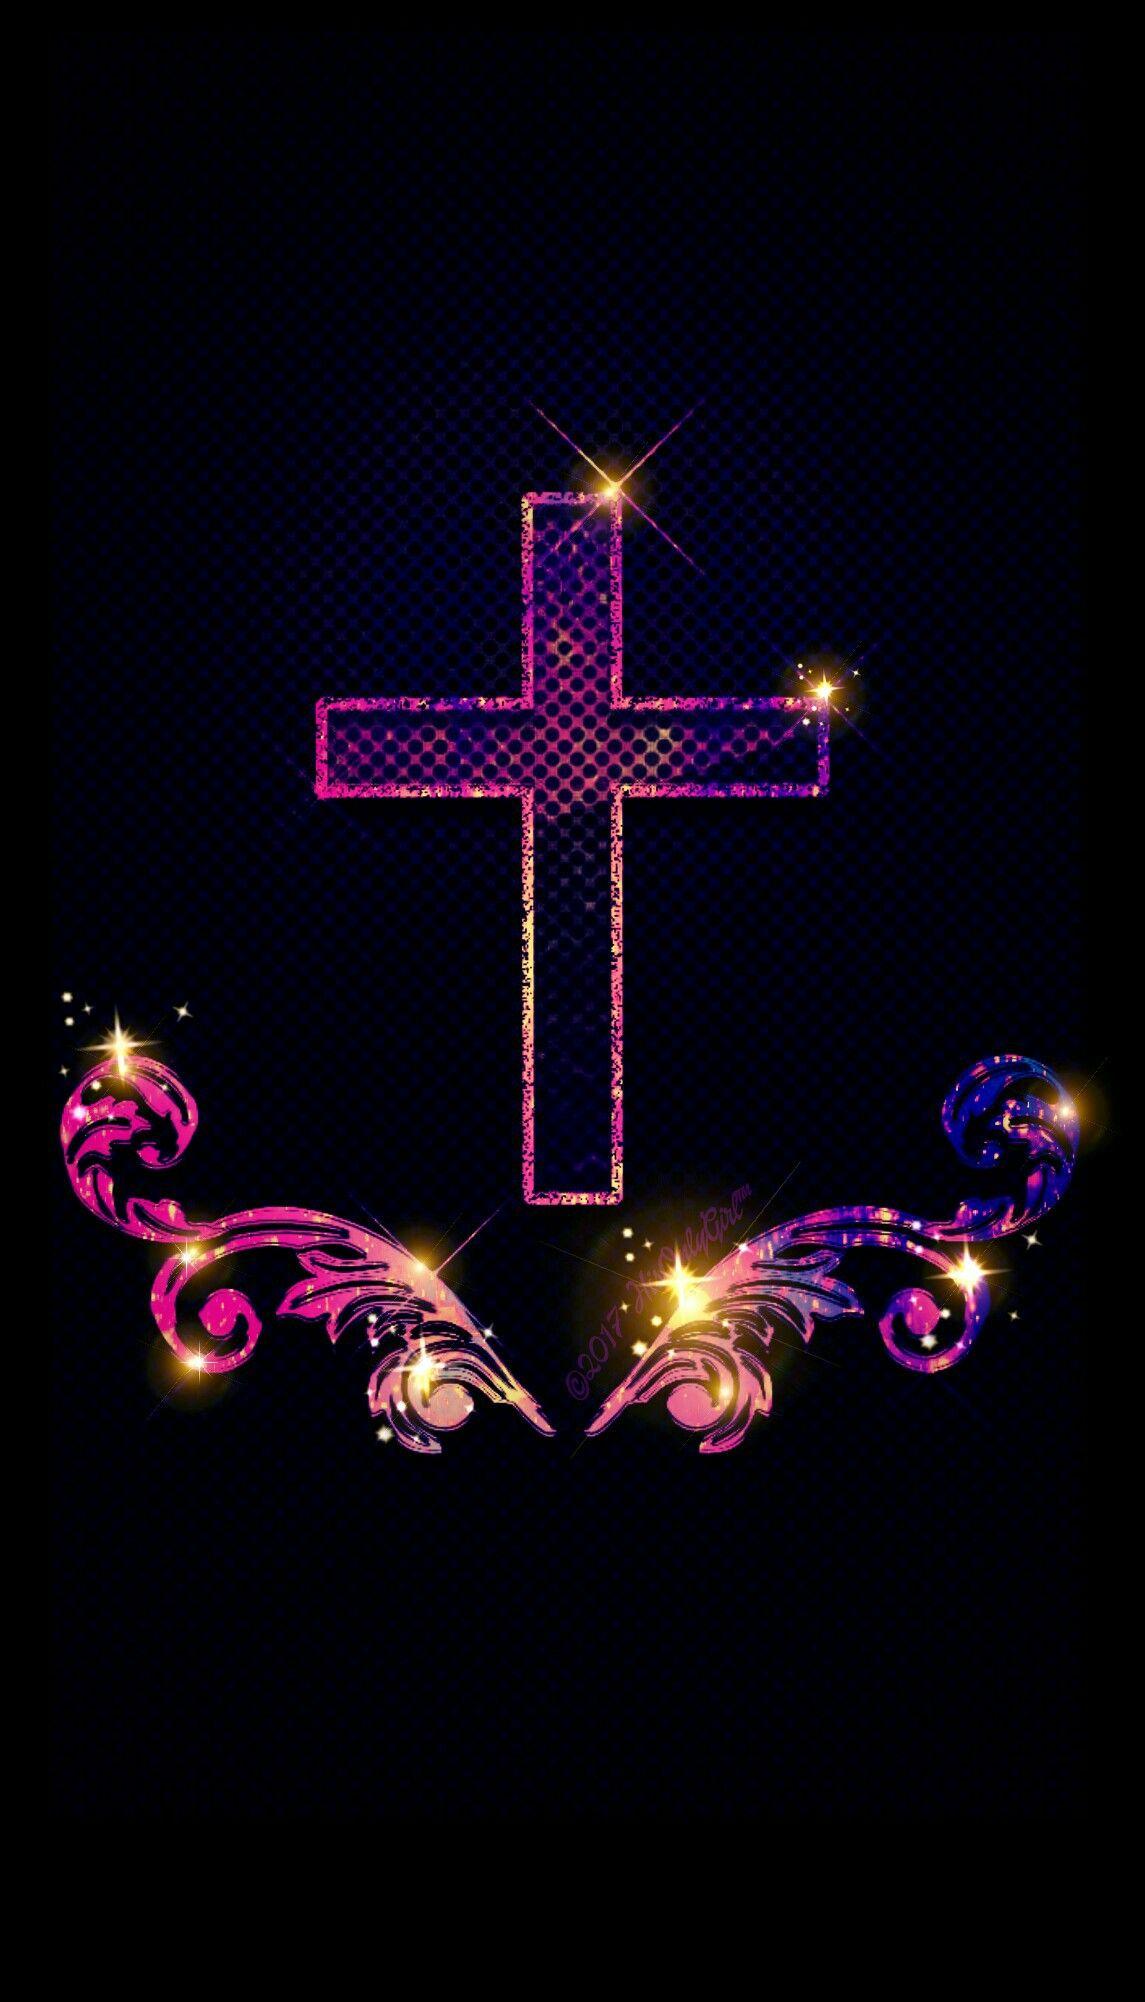 Colorful cross galaxy wallpaper I created for the app CocoPPa